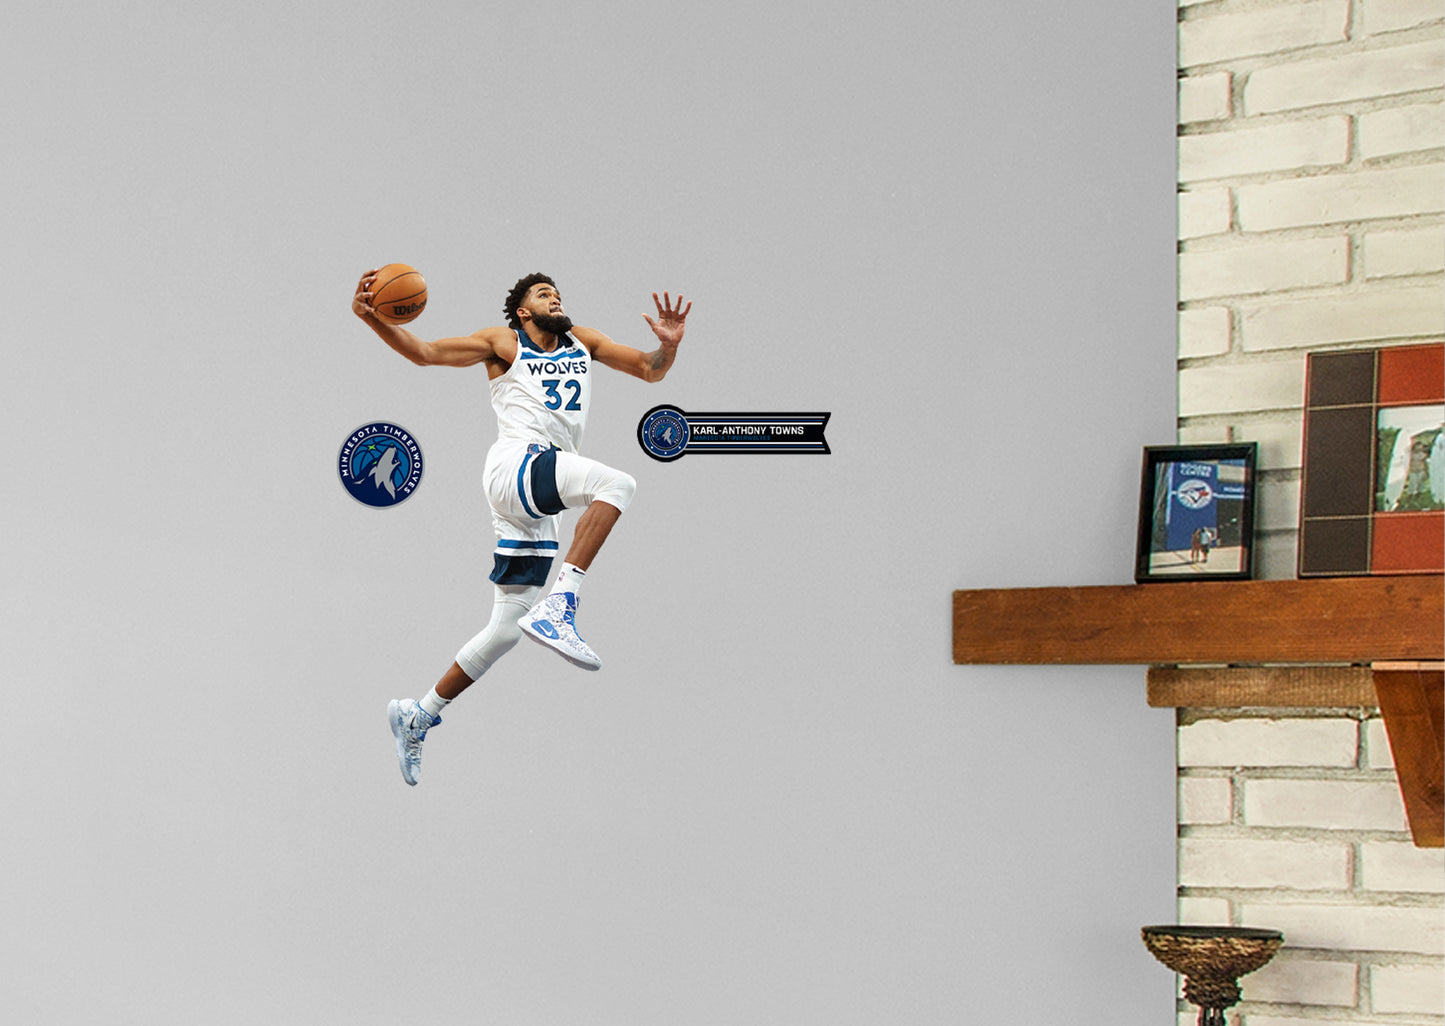 Minnesota Timberwolves: Karl-Anthony Towns Dunk - Officially Licensed NBA Removable Adhesive Decal